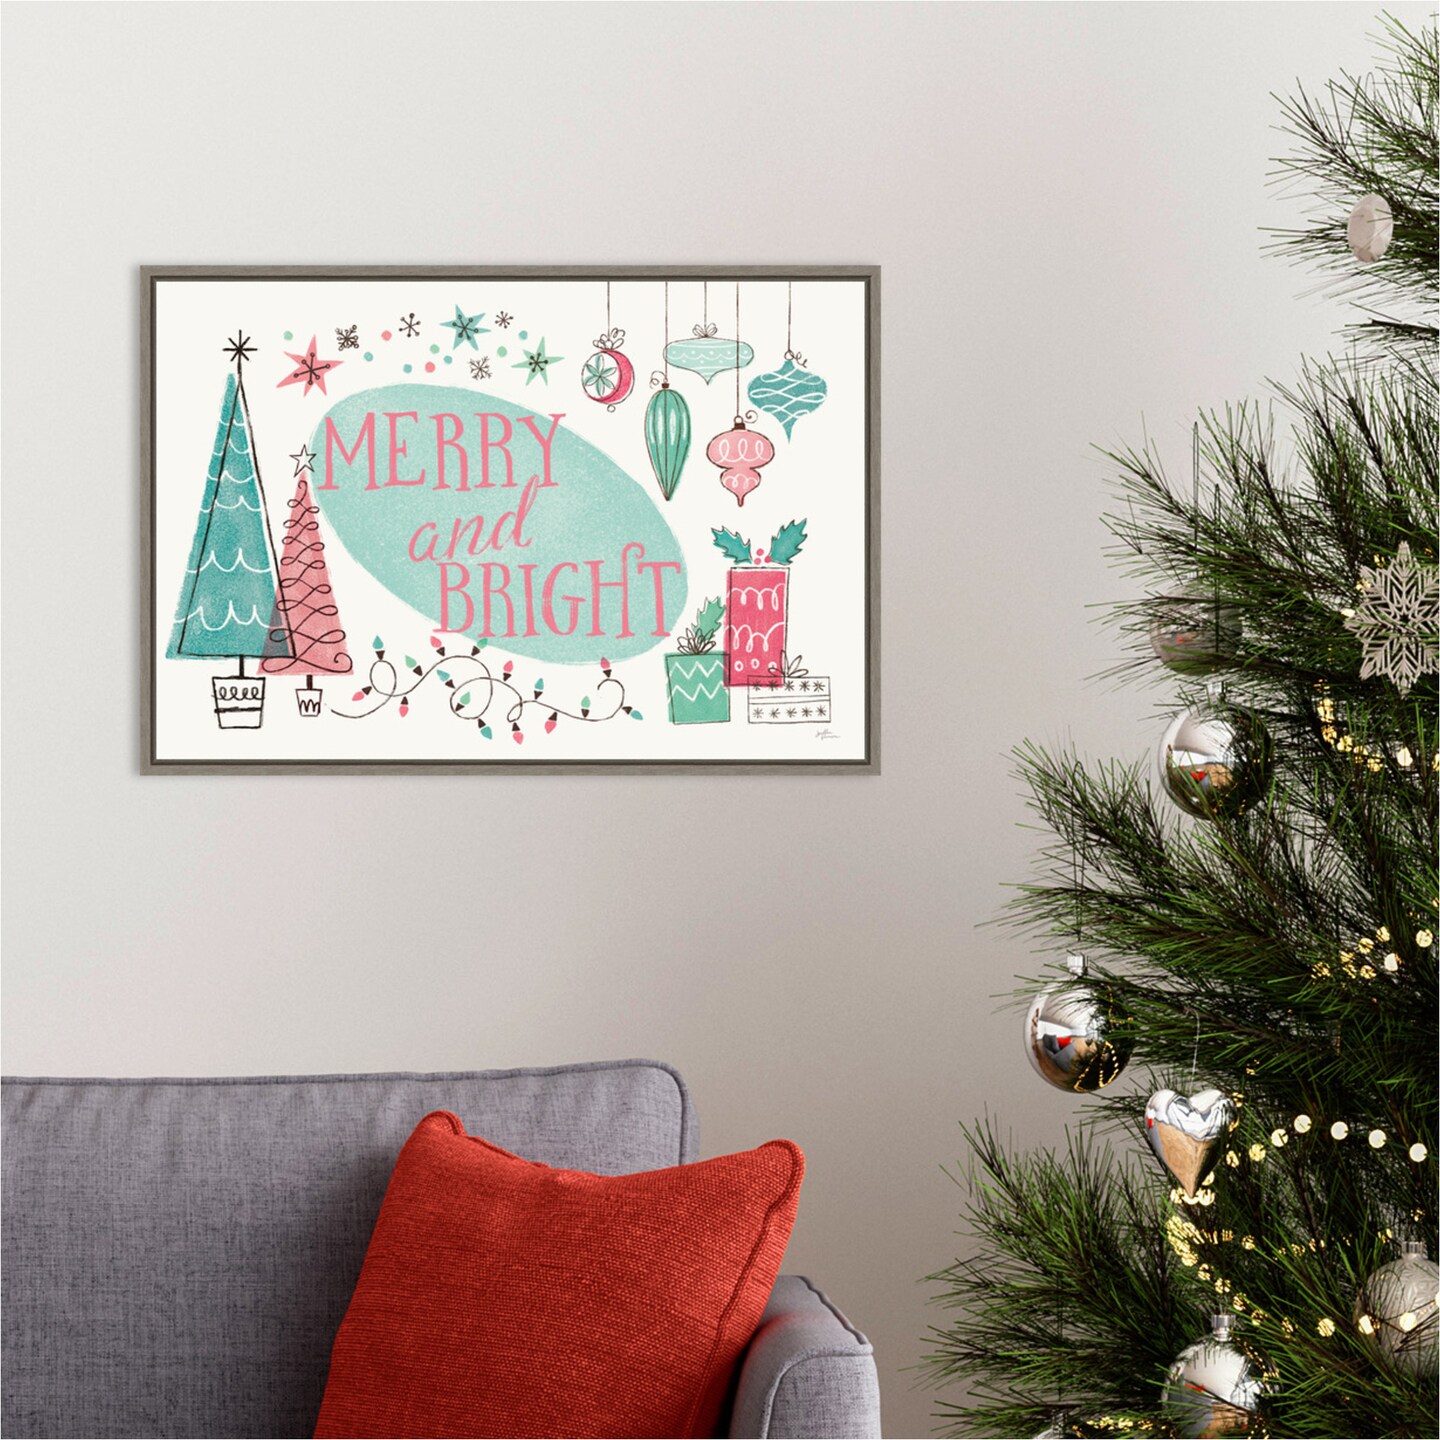 Retro Christmas I Bright by Janelle Penner 23-in. W x 16-in. H. Canvas Wall Art Print Framed in Grey